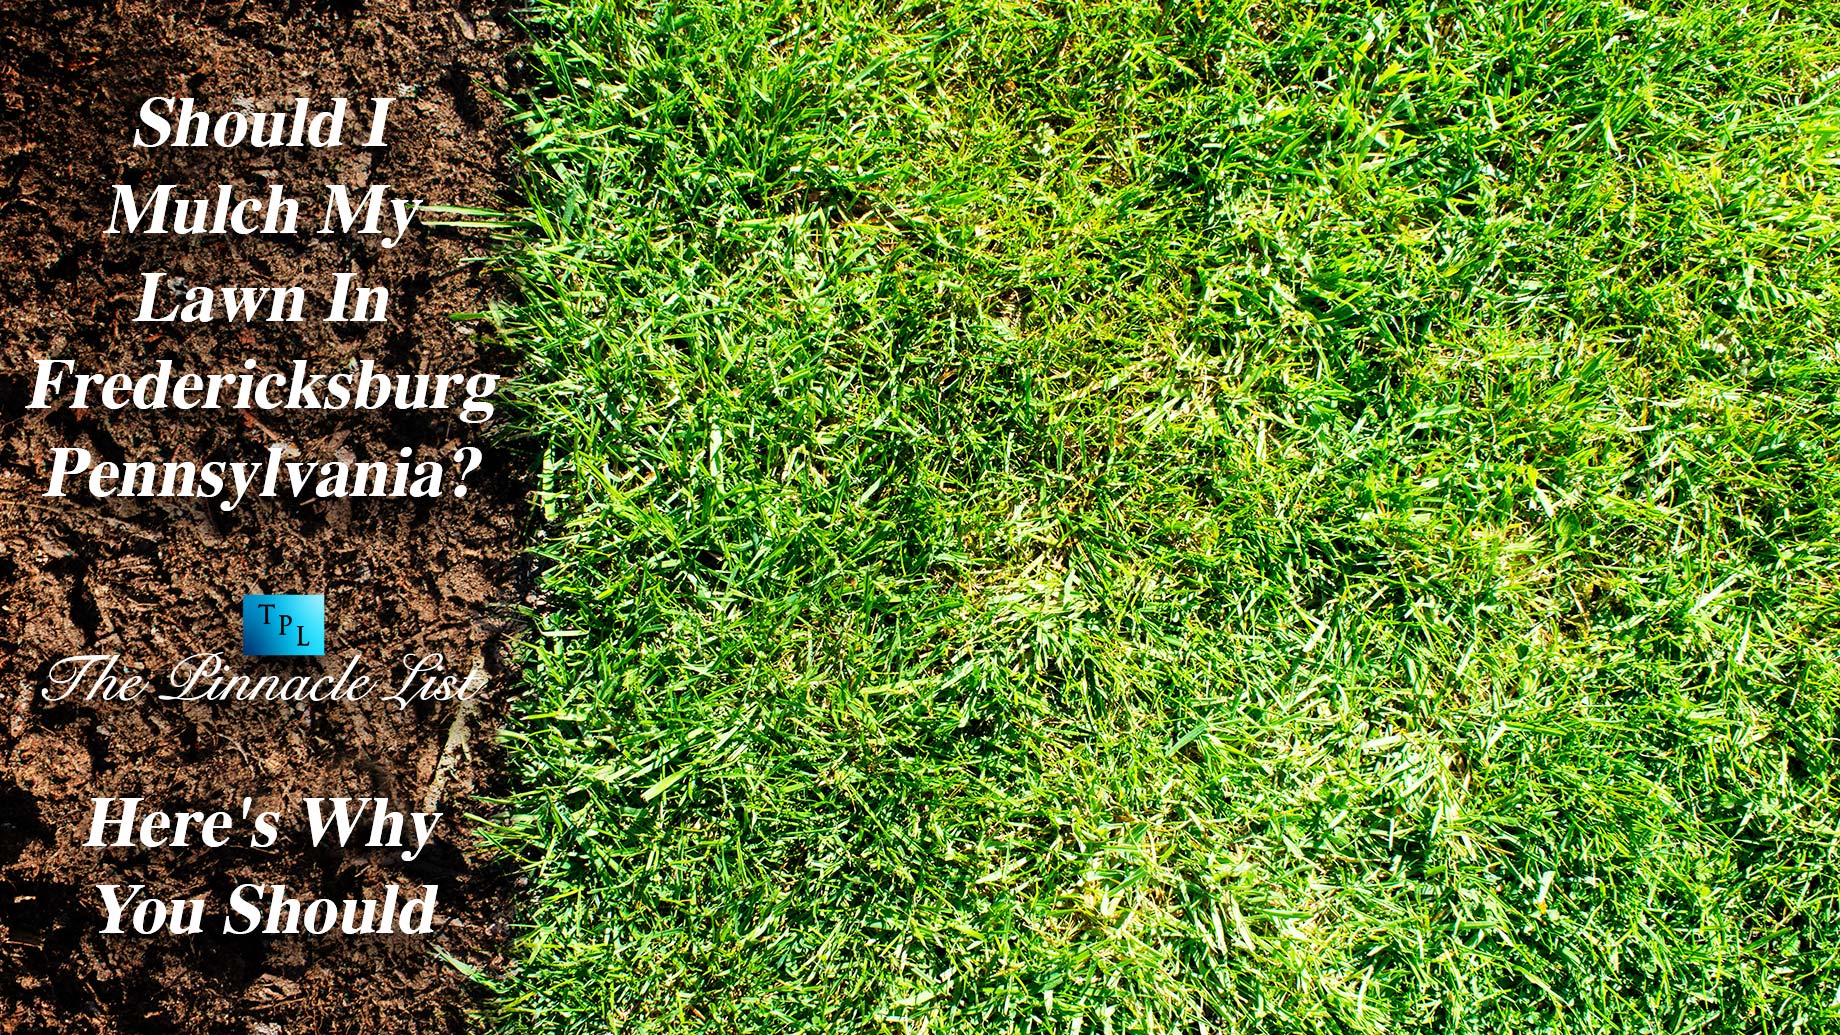 Should I Mulch My Lawn In Fredericksburg, Pennsylvania? Here's Why You Should